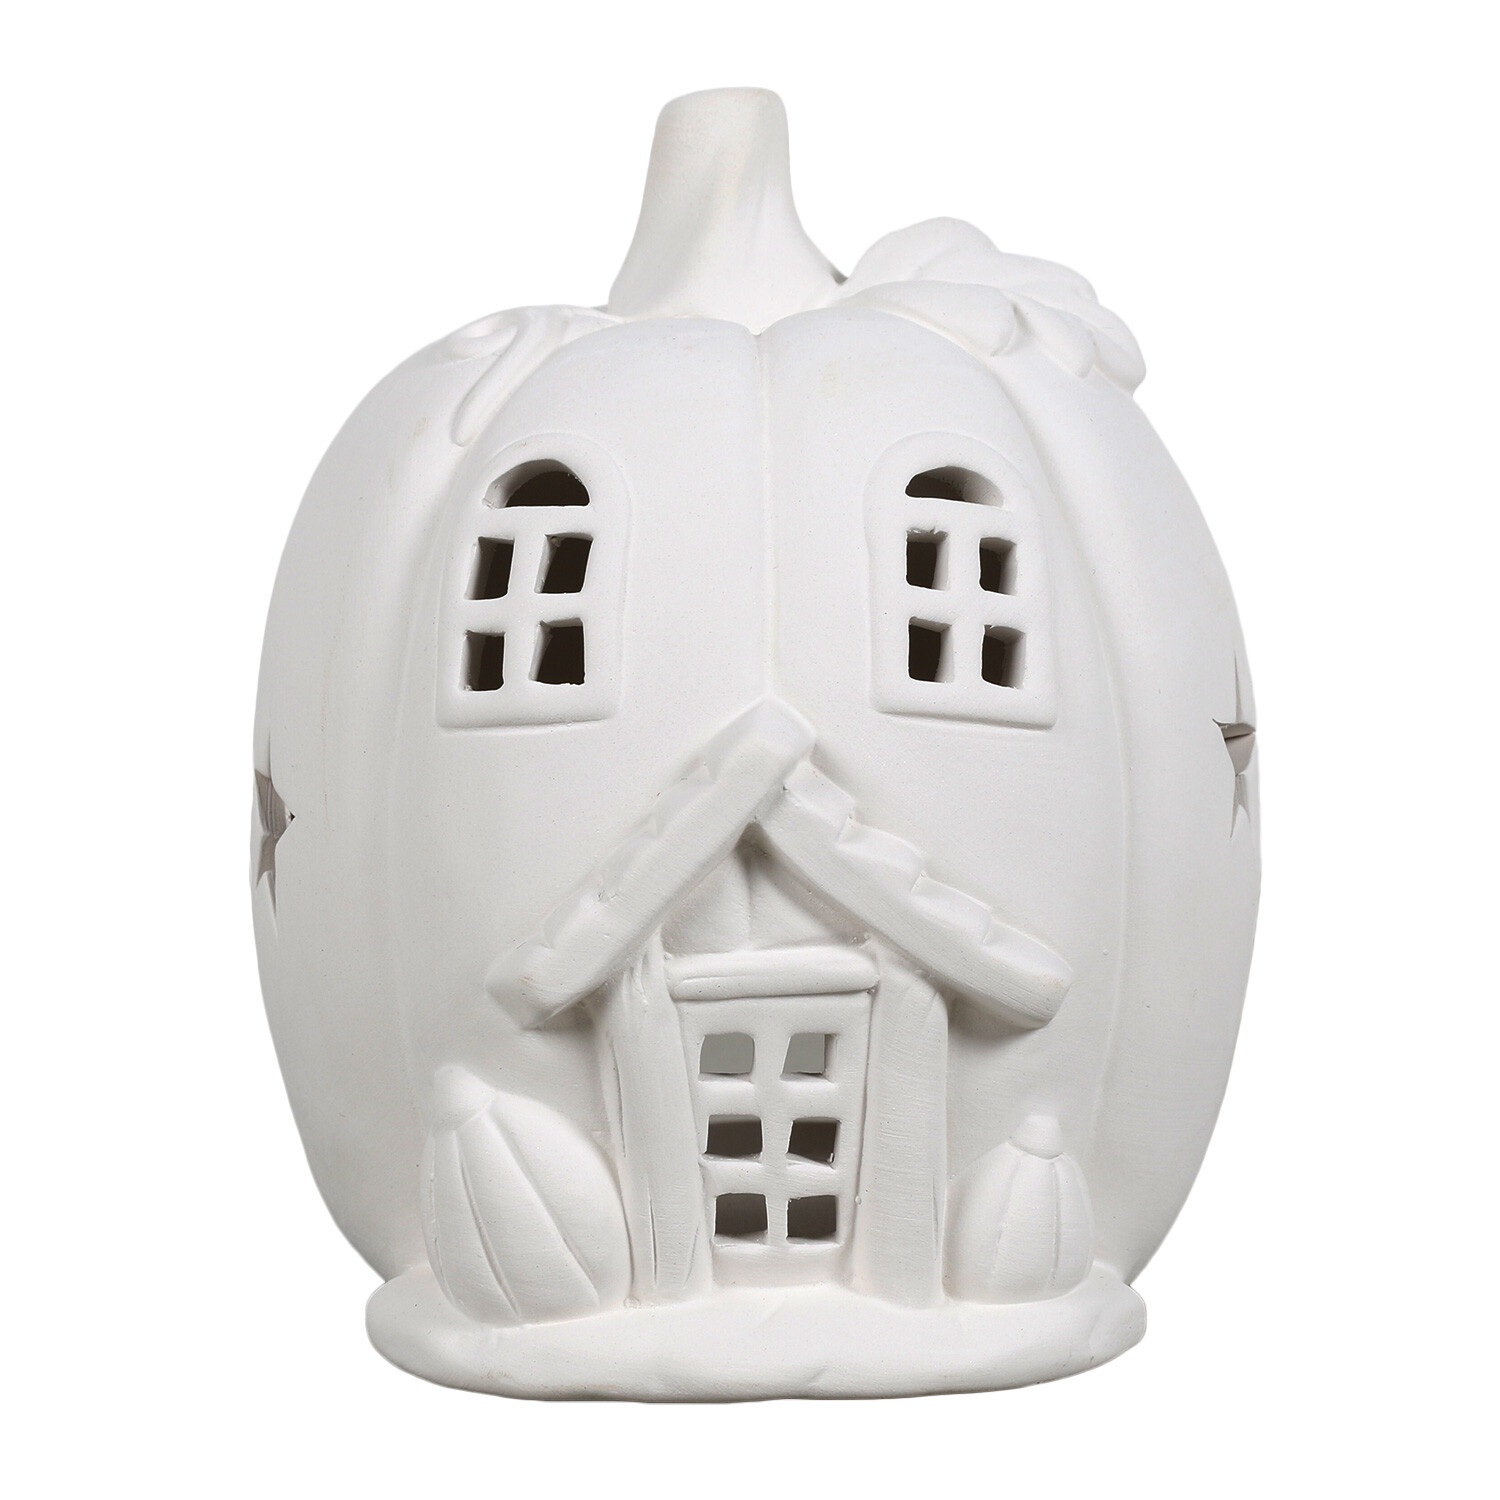 Paint Your Own Ceramic Pumpkin House - White Image 1